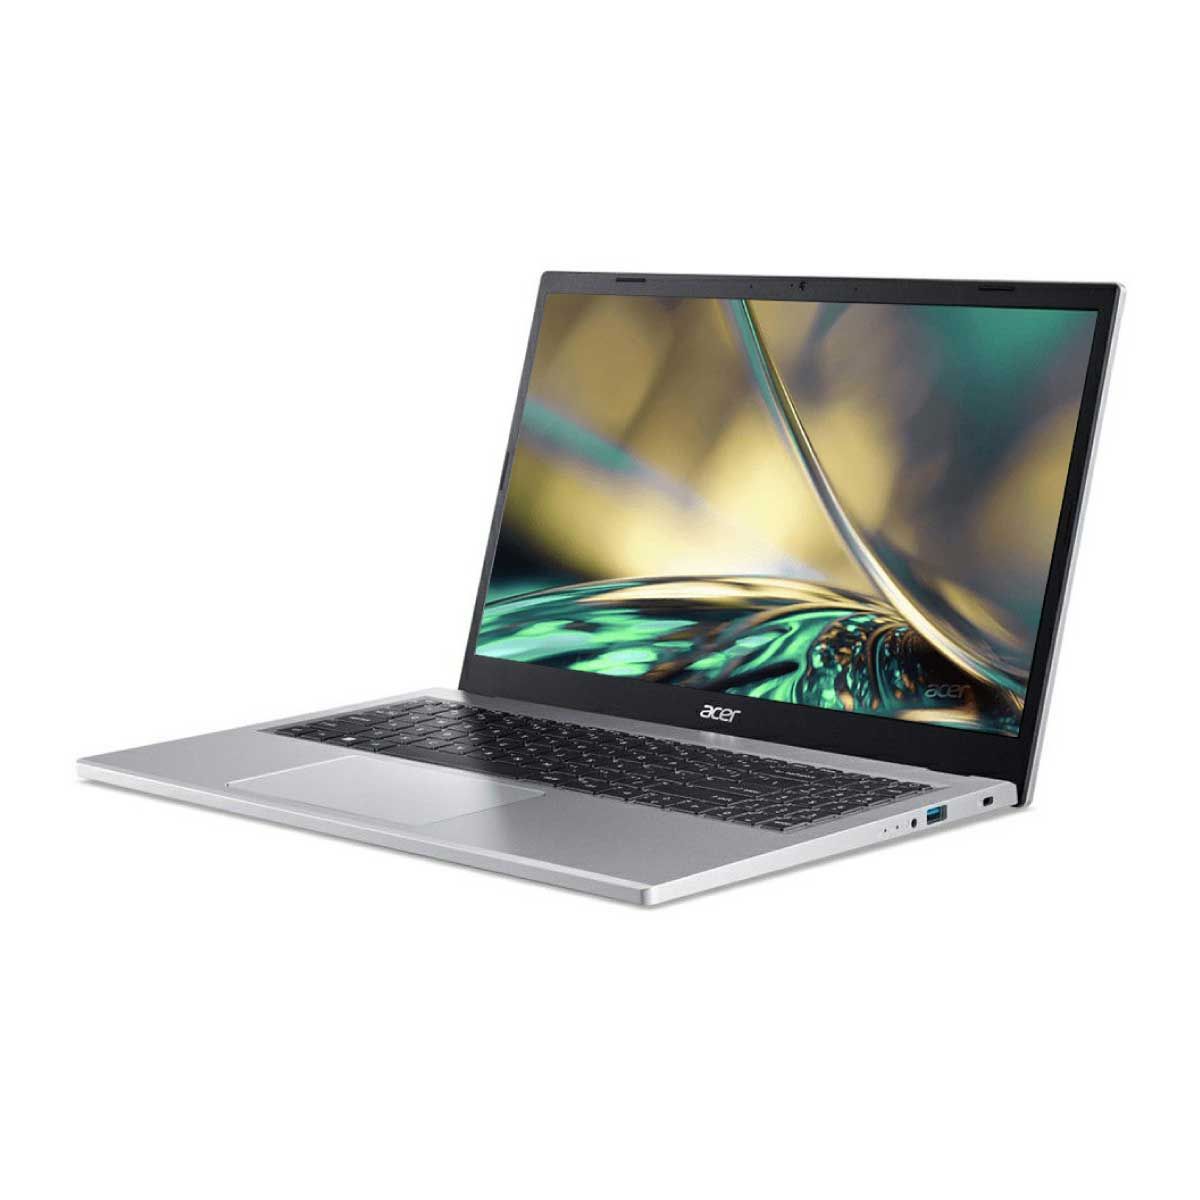 NOTEBOOK (โน้ตบุ๊ค) ACER ASPIRE 3 A315-510P-35AX (PURE SILVER)